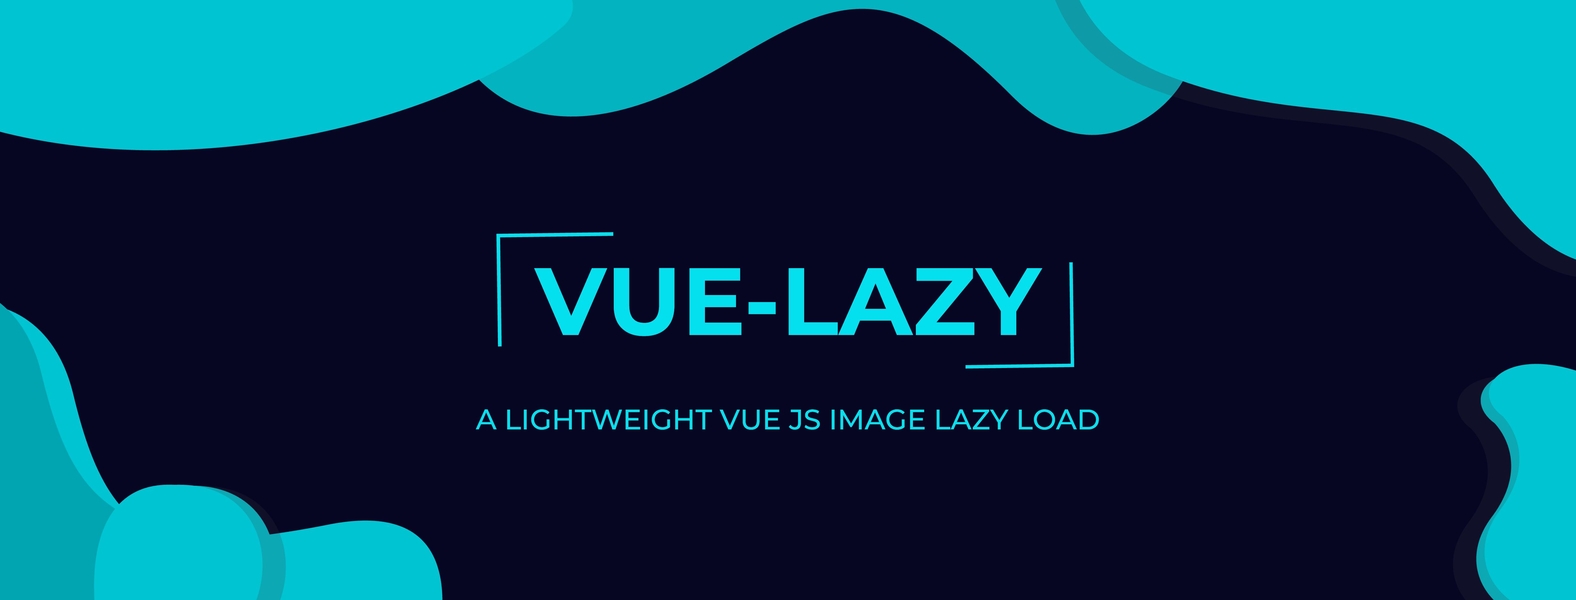 Vue Lazy – A Lightweight Image Lazy Load Vue Component   cover image